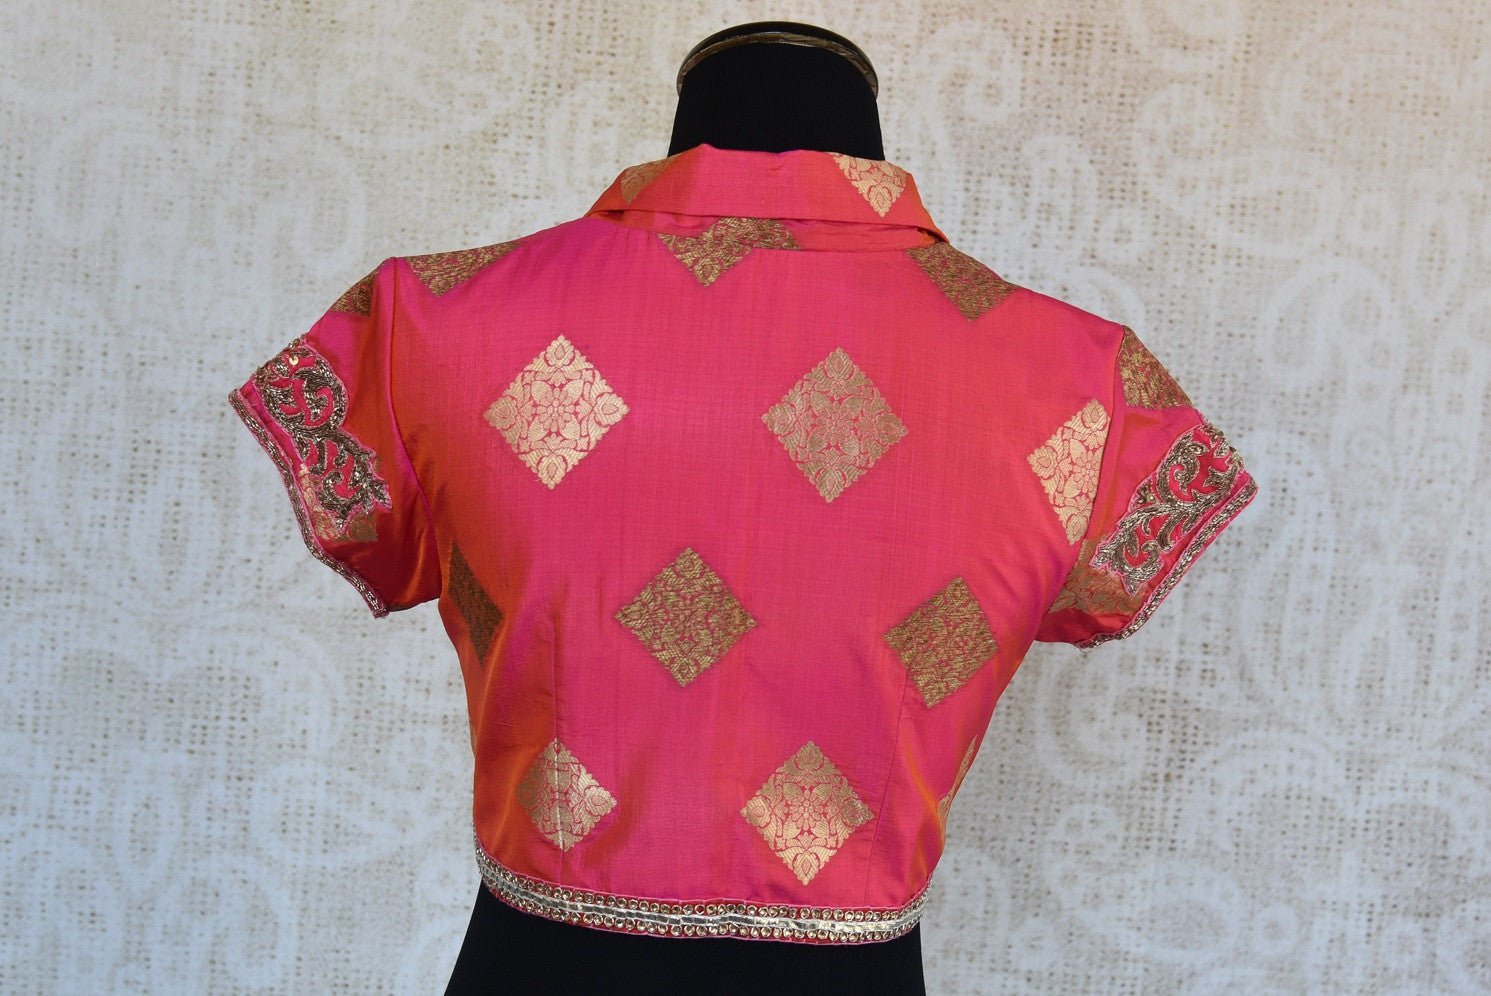 Shop this traditional Indian embroidered banarasi designer blouse from Pure Elegance online or from our store in USA. Perfect for any wedding or reception party. Back View.